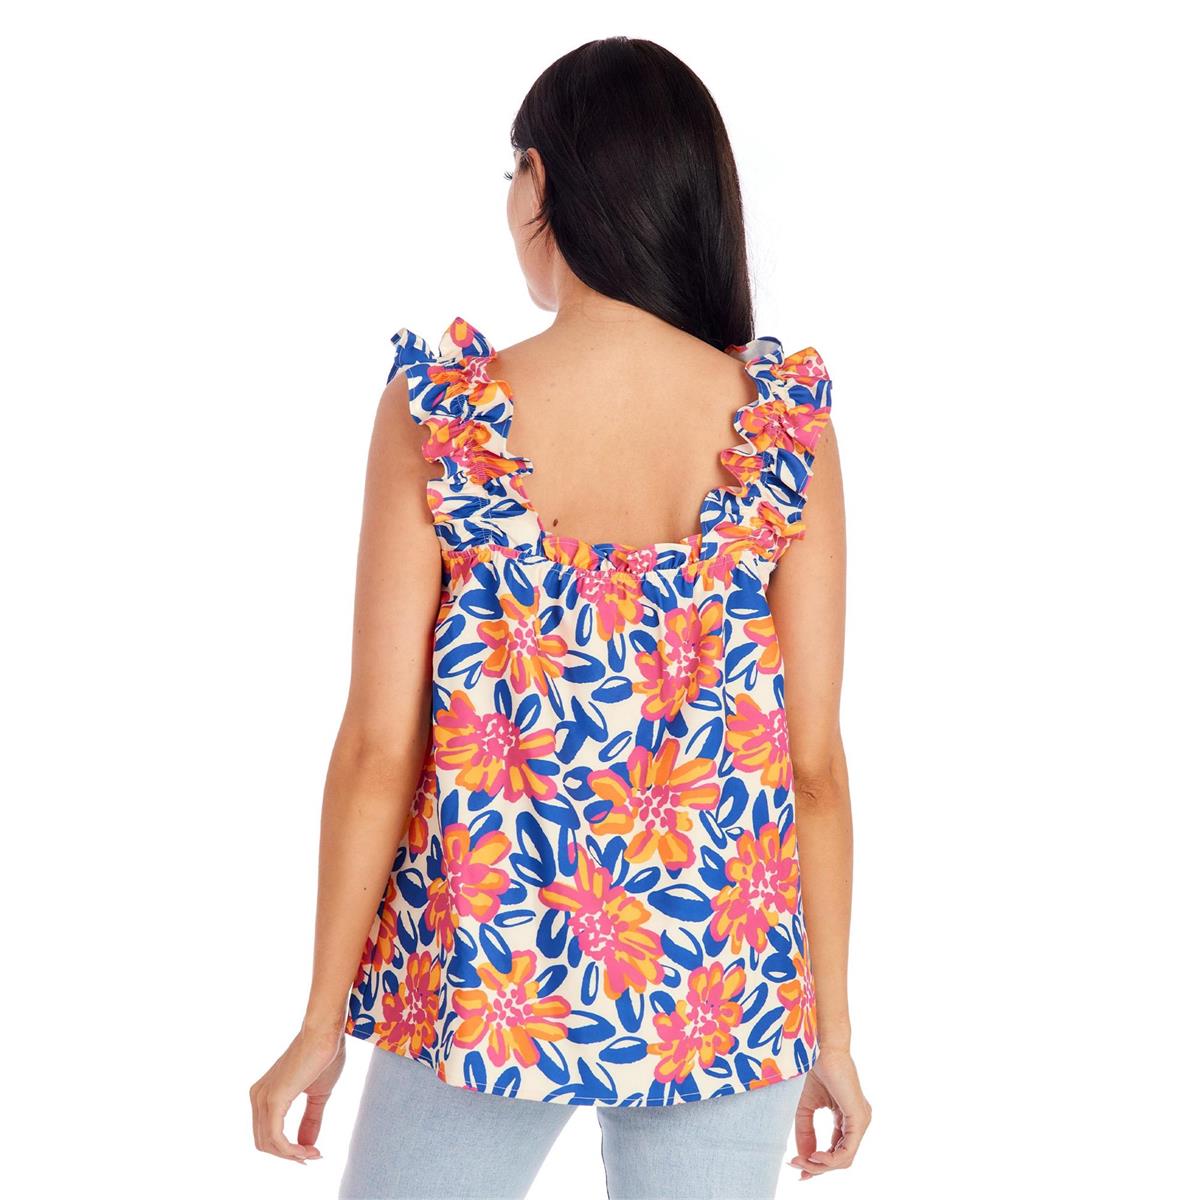 Floral Charlie Ruffle Top